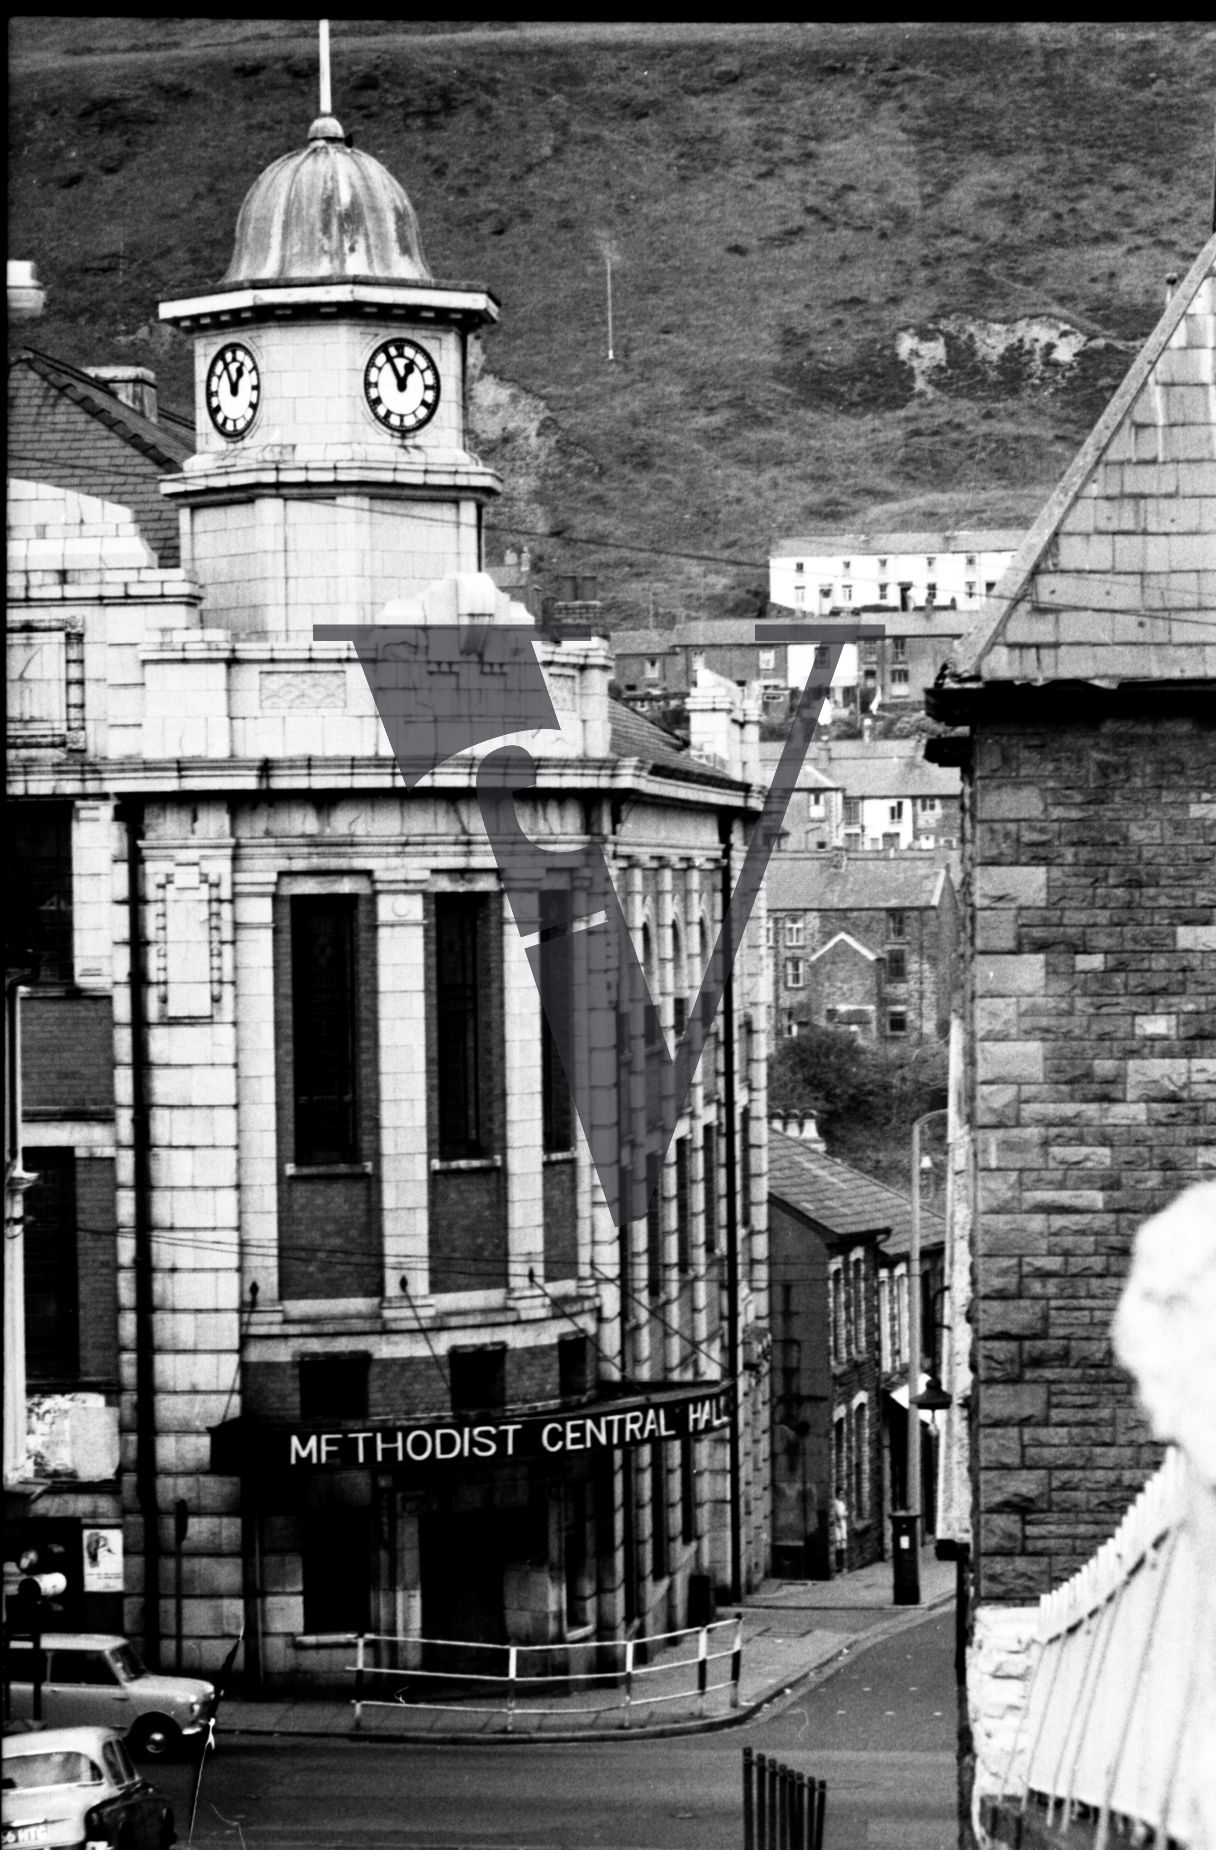 Tonypandy, Wales, Mining Community, Methodist Central Hall, street view.